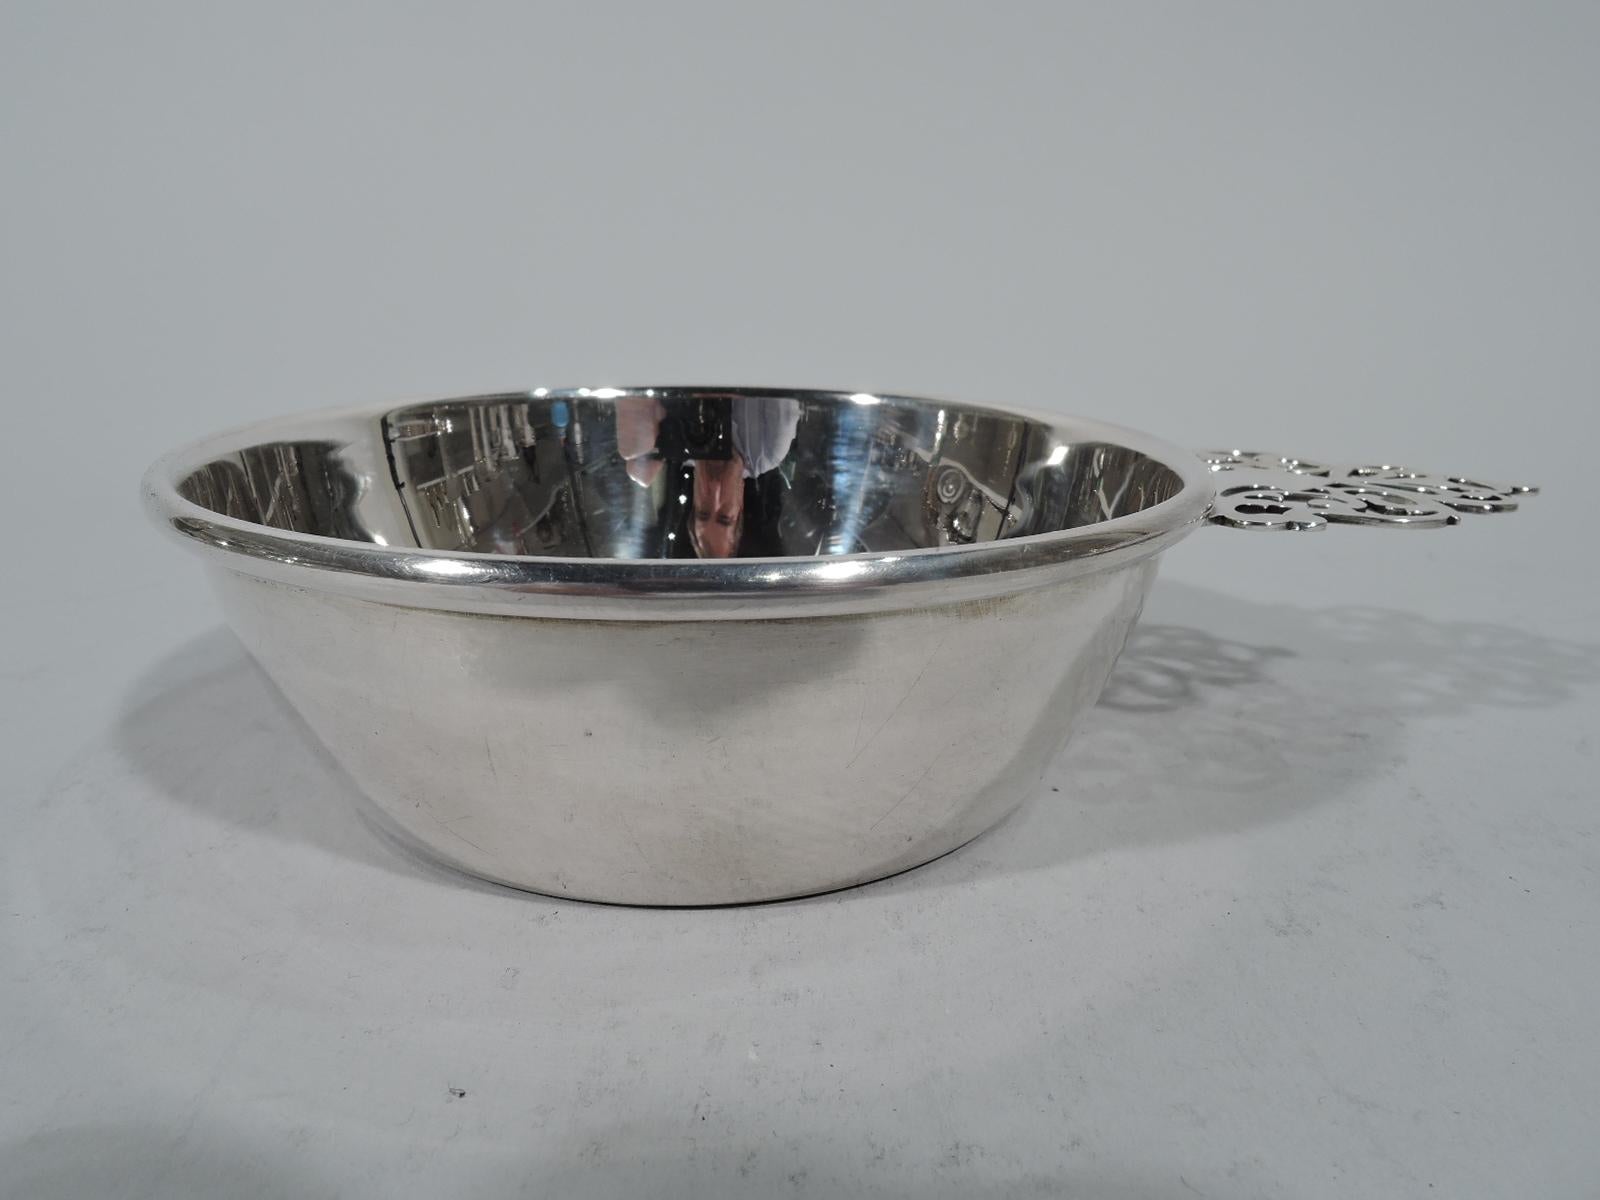 Traditional sterling silver porringer. Retailed by Cartier in New York. Tapering sides and open tree handle. Fully marked with maker’s (Baldwin & Miller) and retailer’s stamps and no. D60. Weight: 4.7 troy ounces.